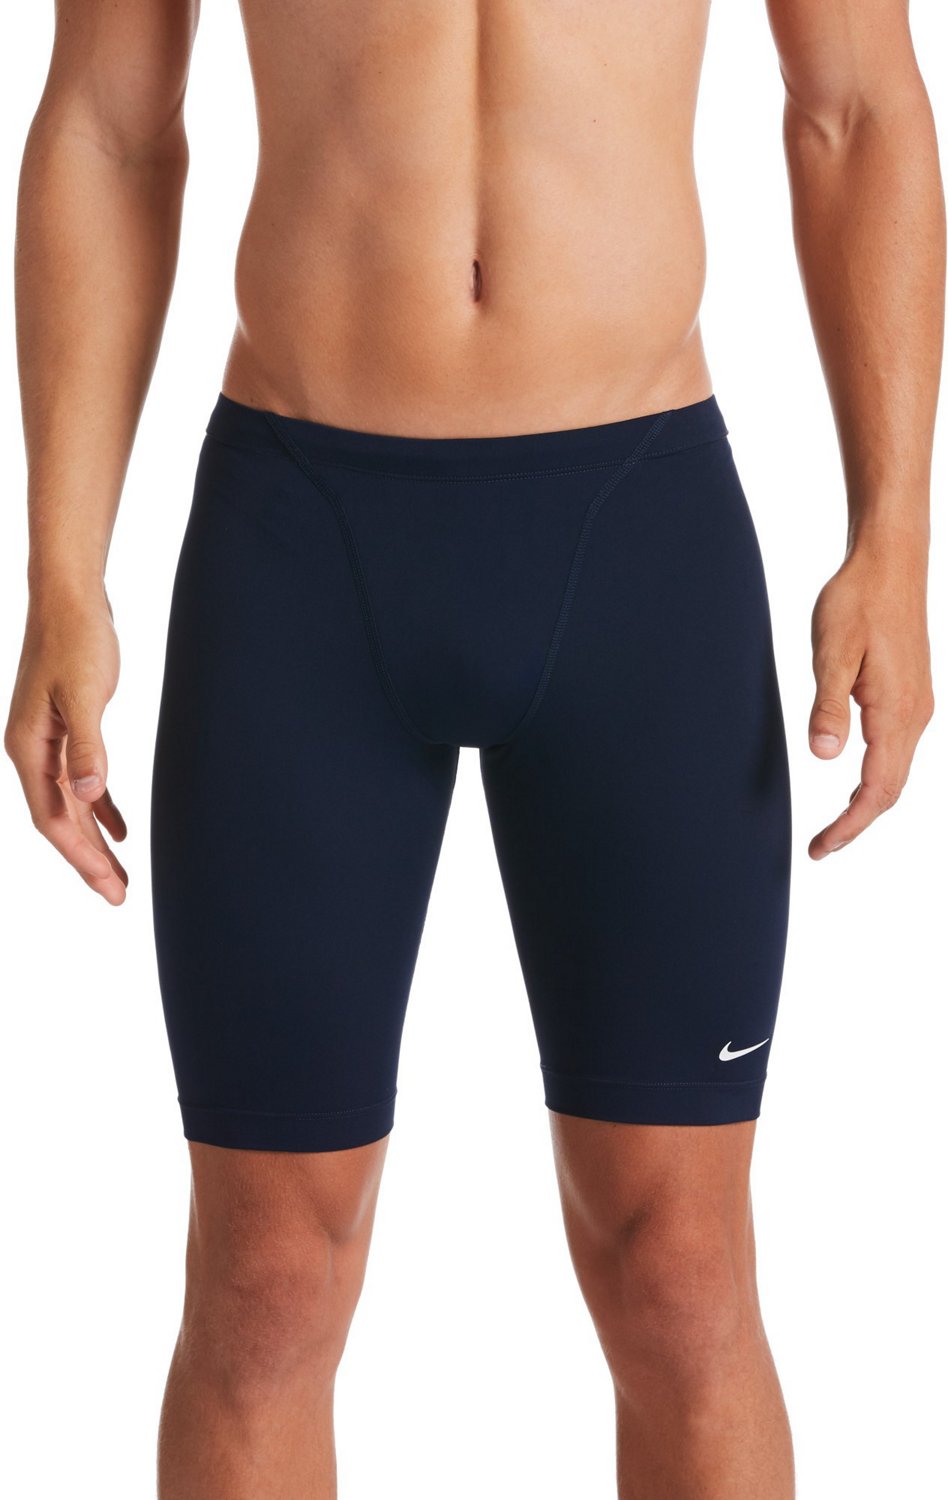 Nike Men's HydraStrong Solid Jammers | Free Shipping at Academy